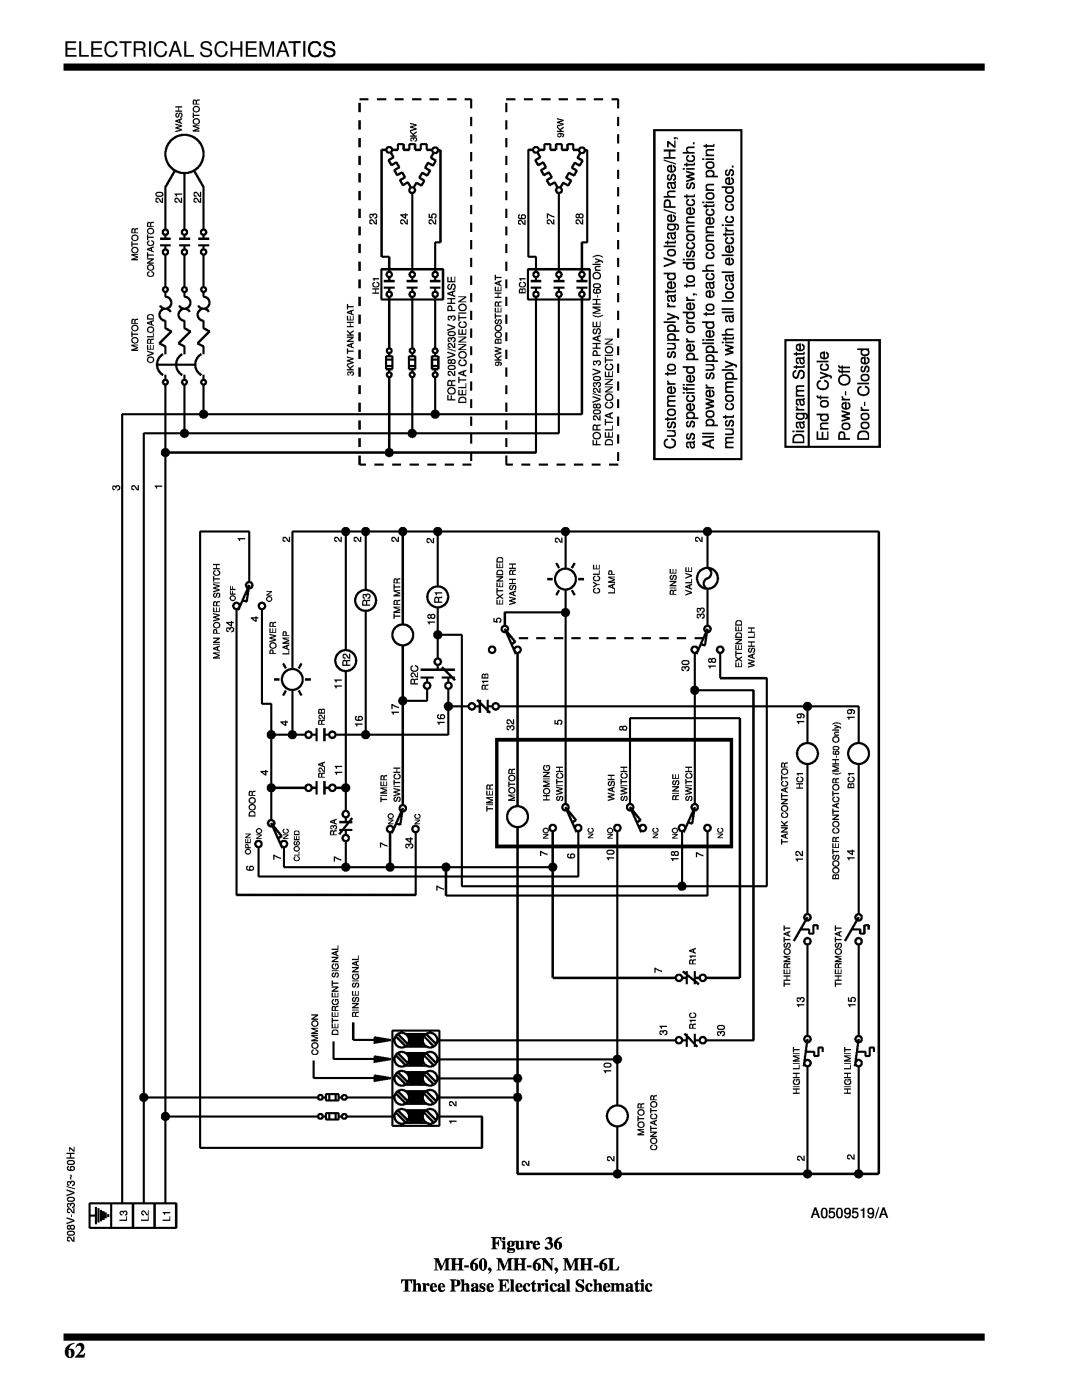 Moyer Diebel MH-60M2, MH-6NM2, MH-6LM2 Electrical Schematics, Three Phase Electrical Schematic, MH-60, MH-6N, MH-6L 